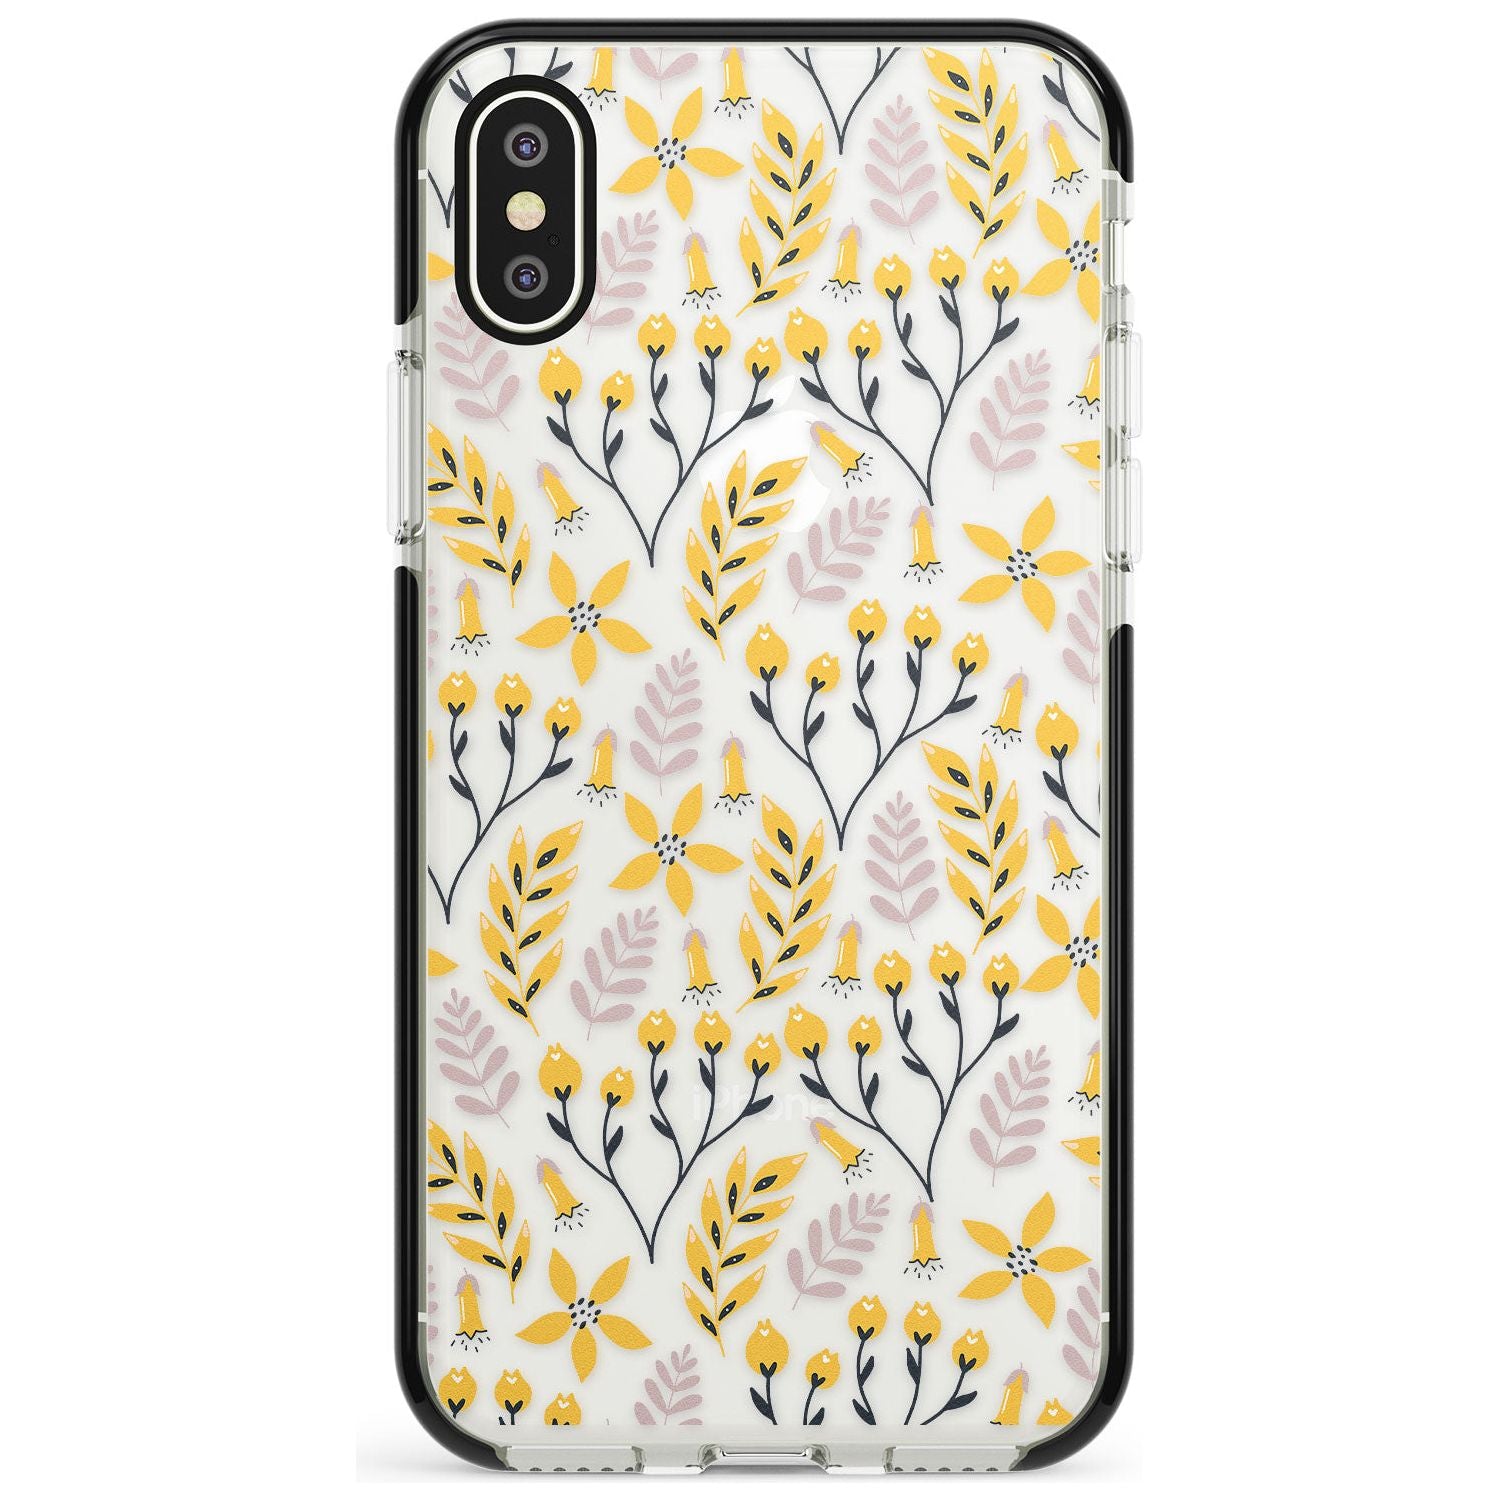 Yellow Leaves Transparent Floral Black Impact Phone Case for iPhone X XS Max XR